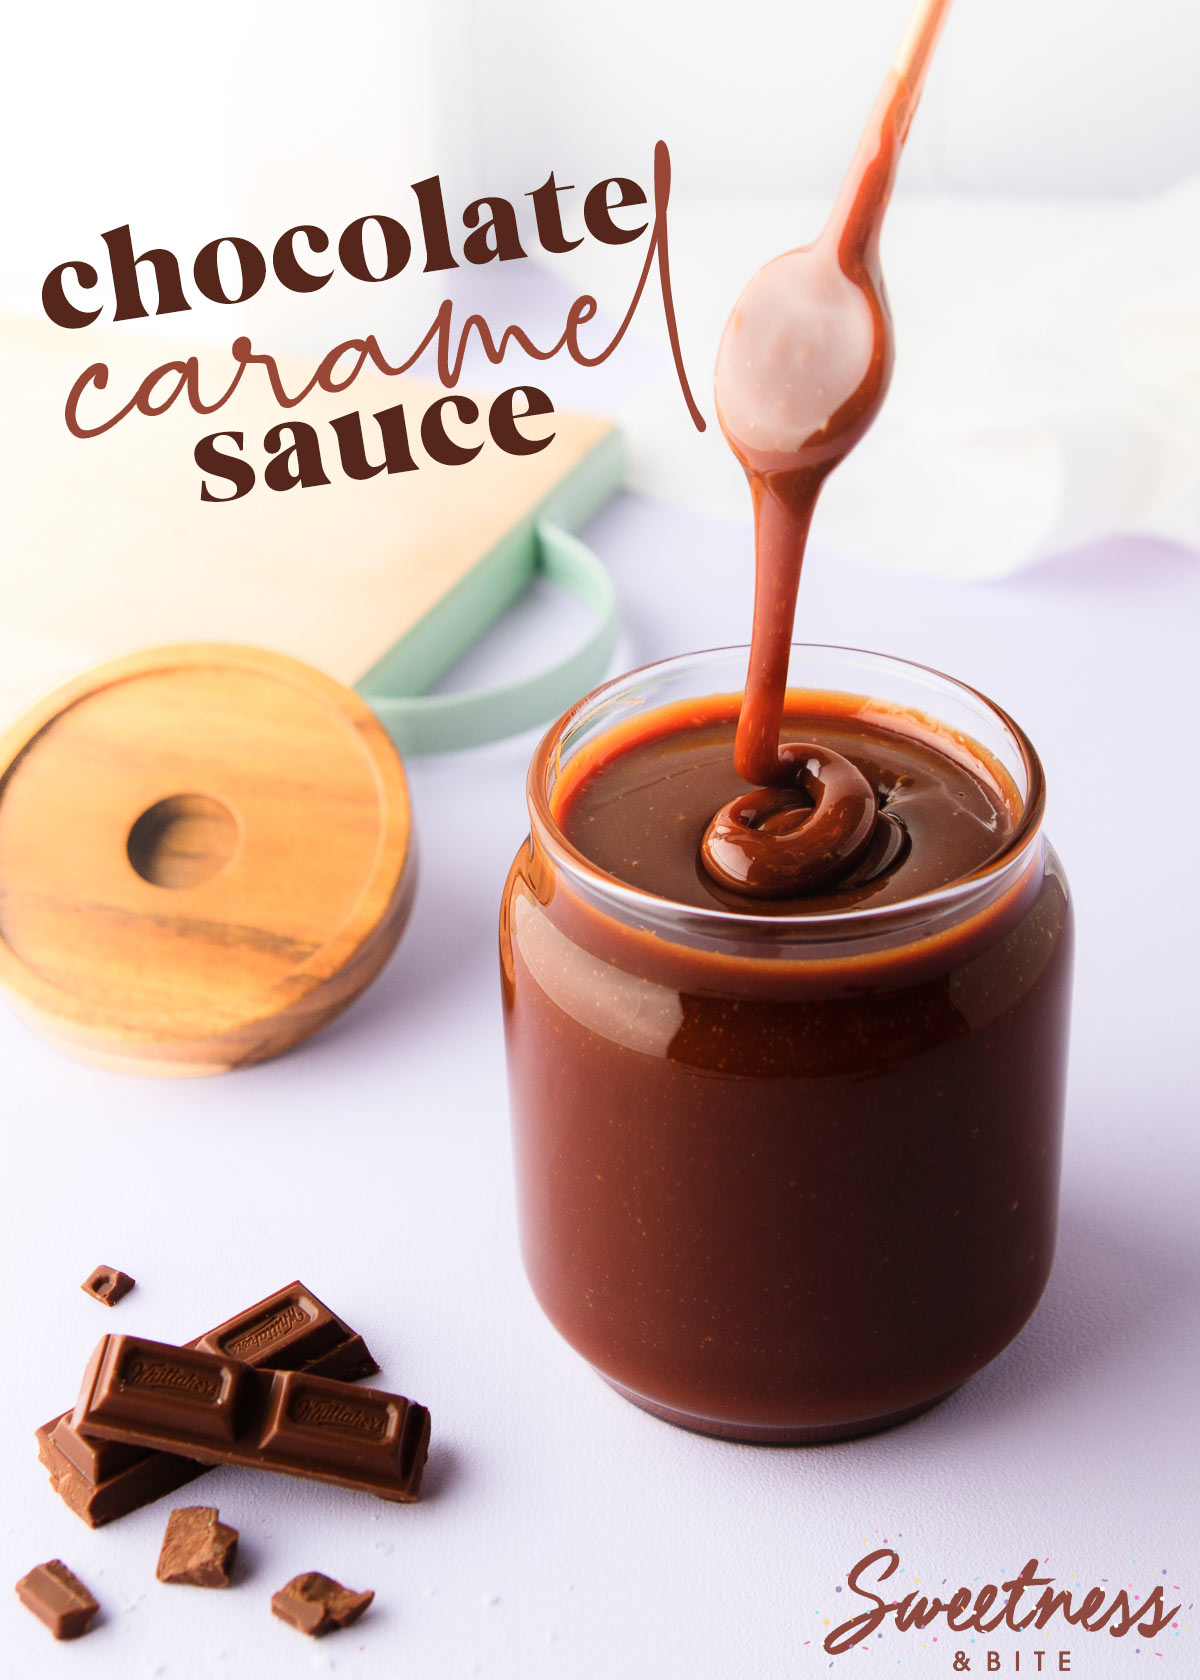 A jar of chocolate caramel sauce on a pale purple background, with a spoon drizzling the thick sauce back into the jar, and some chopped chocolate next to the jar.